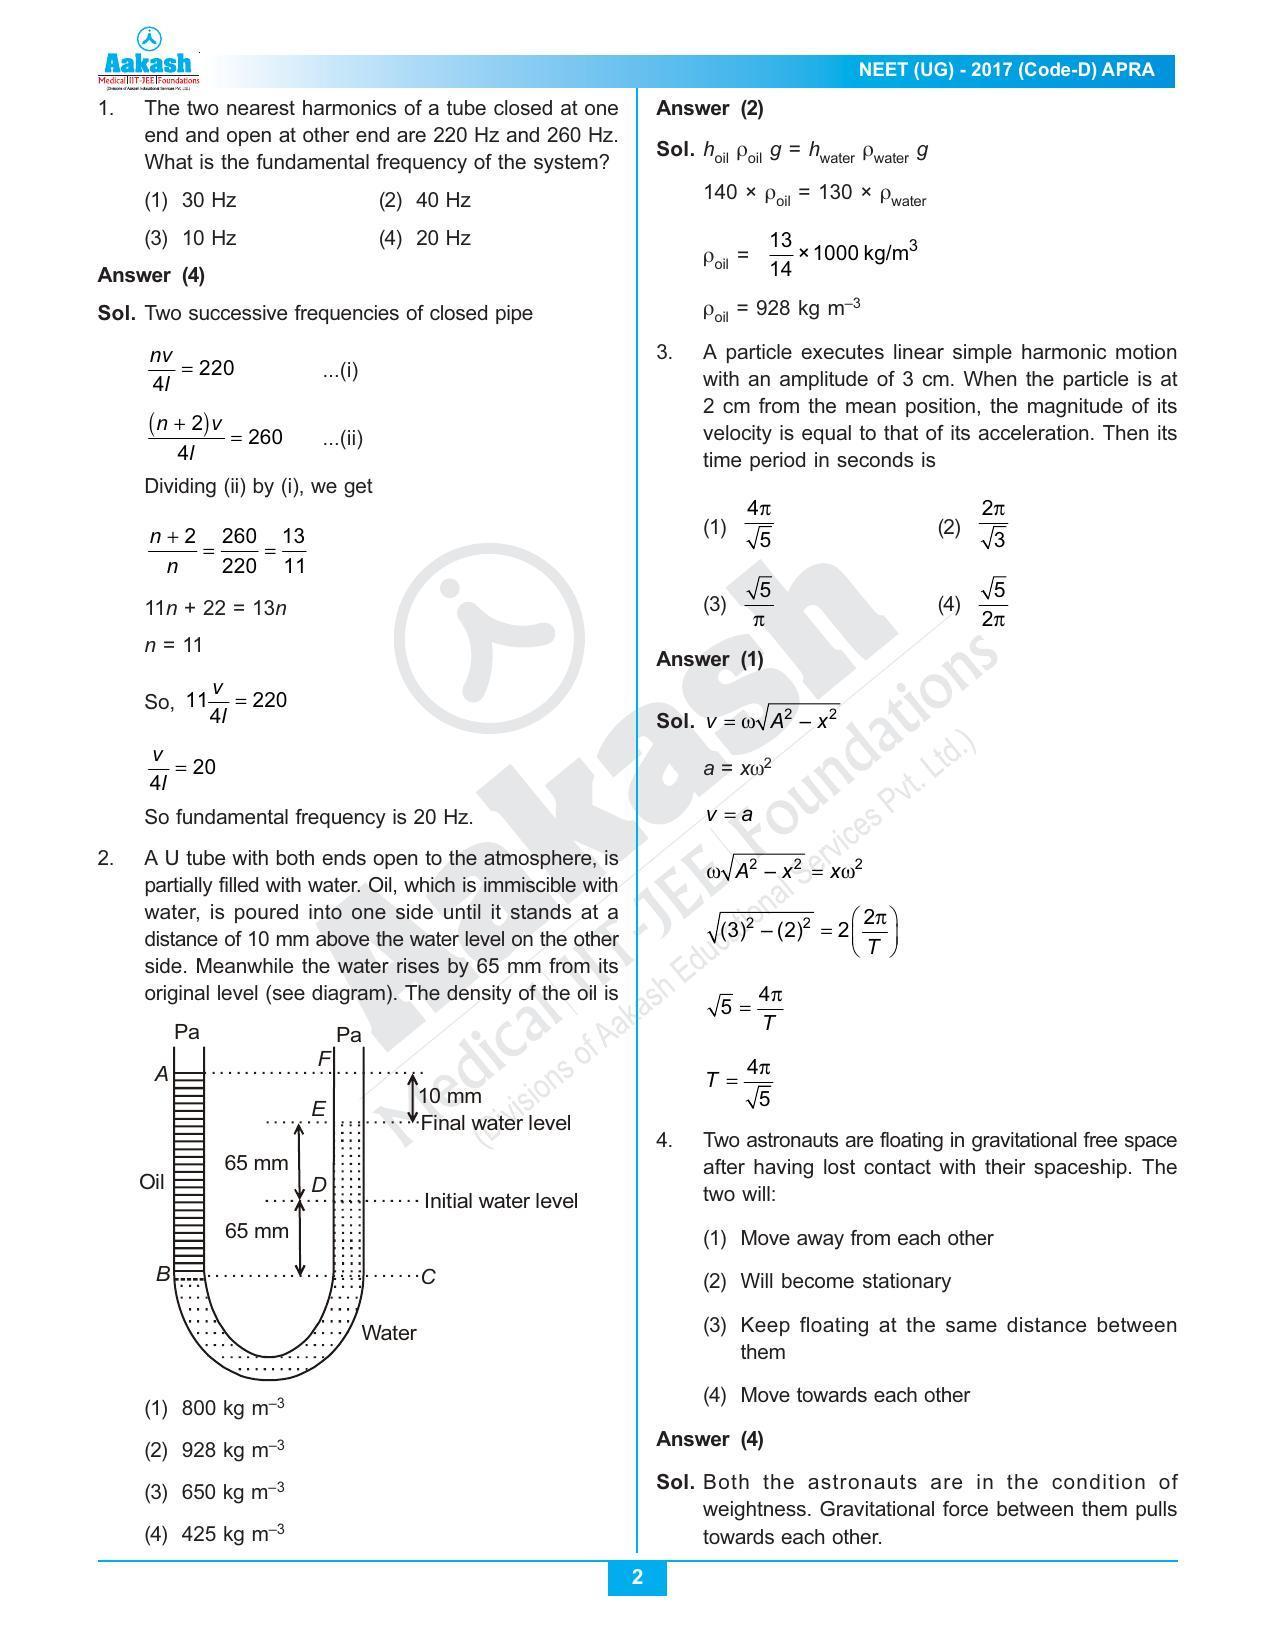  NEET Code D 2017 Answer & Solutions - Page 2